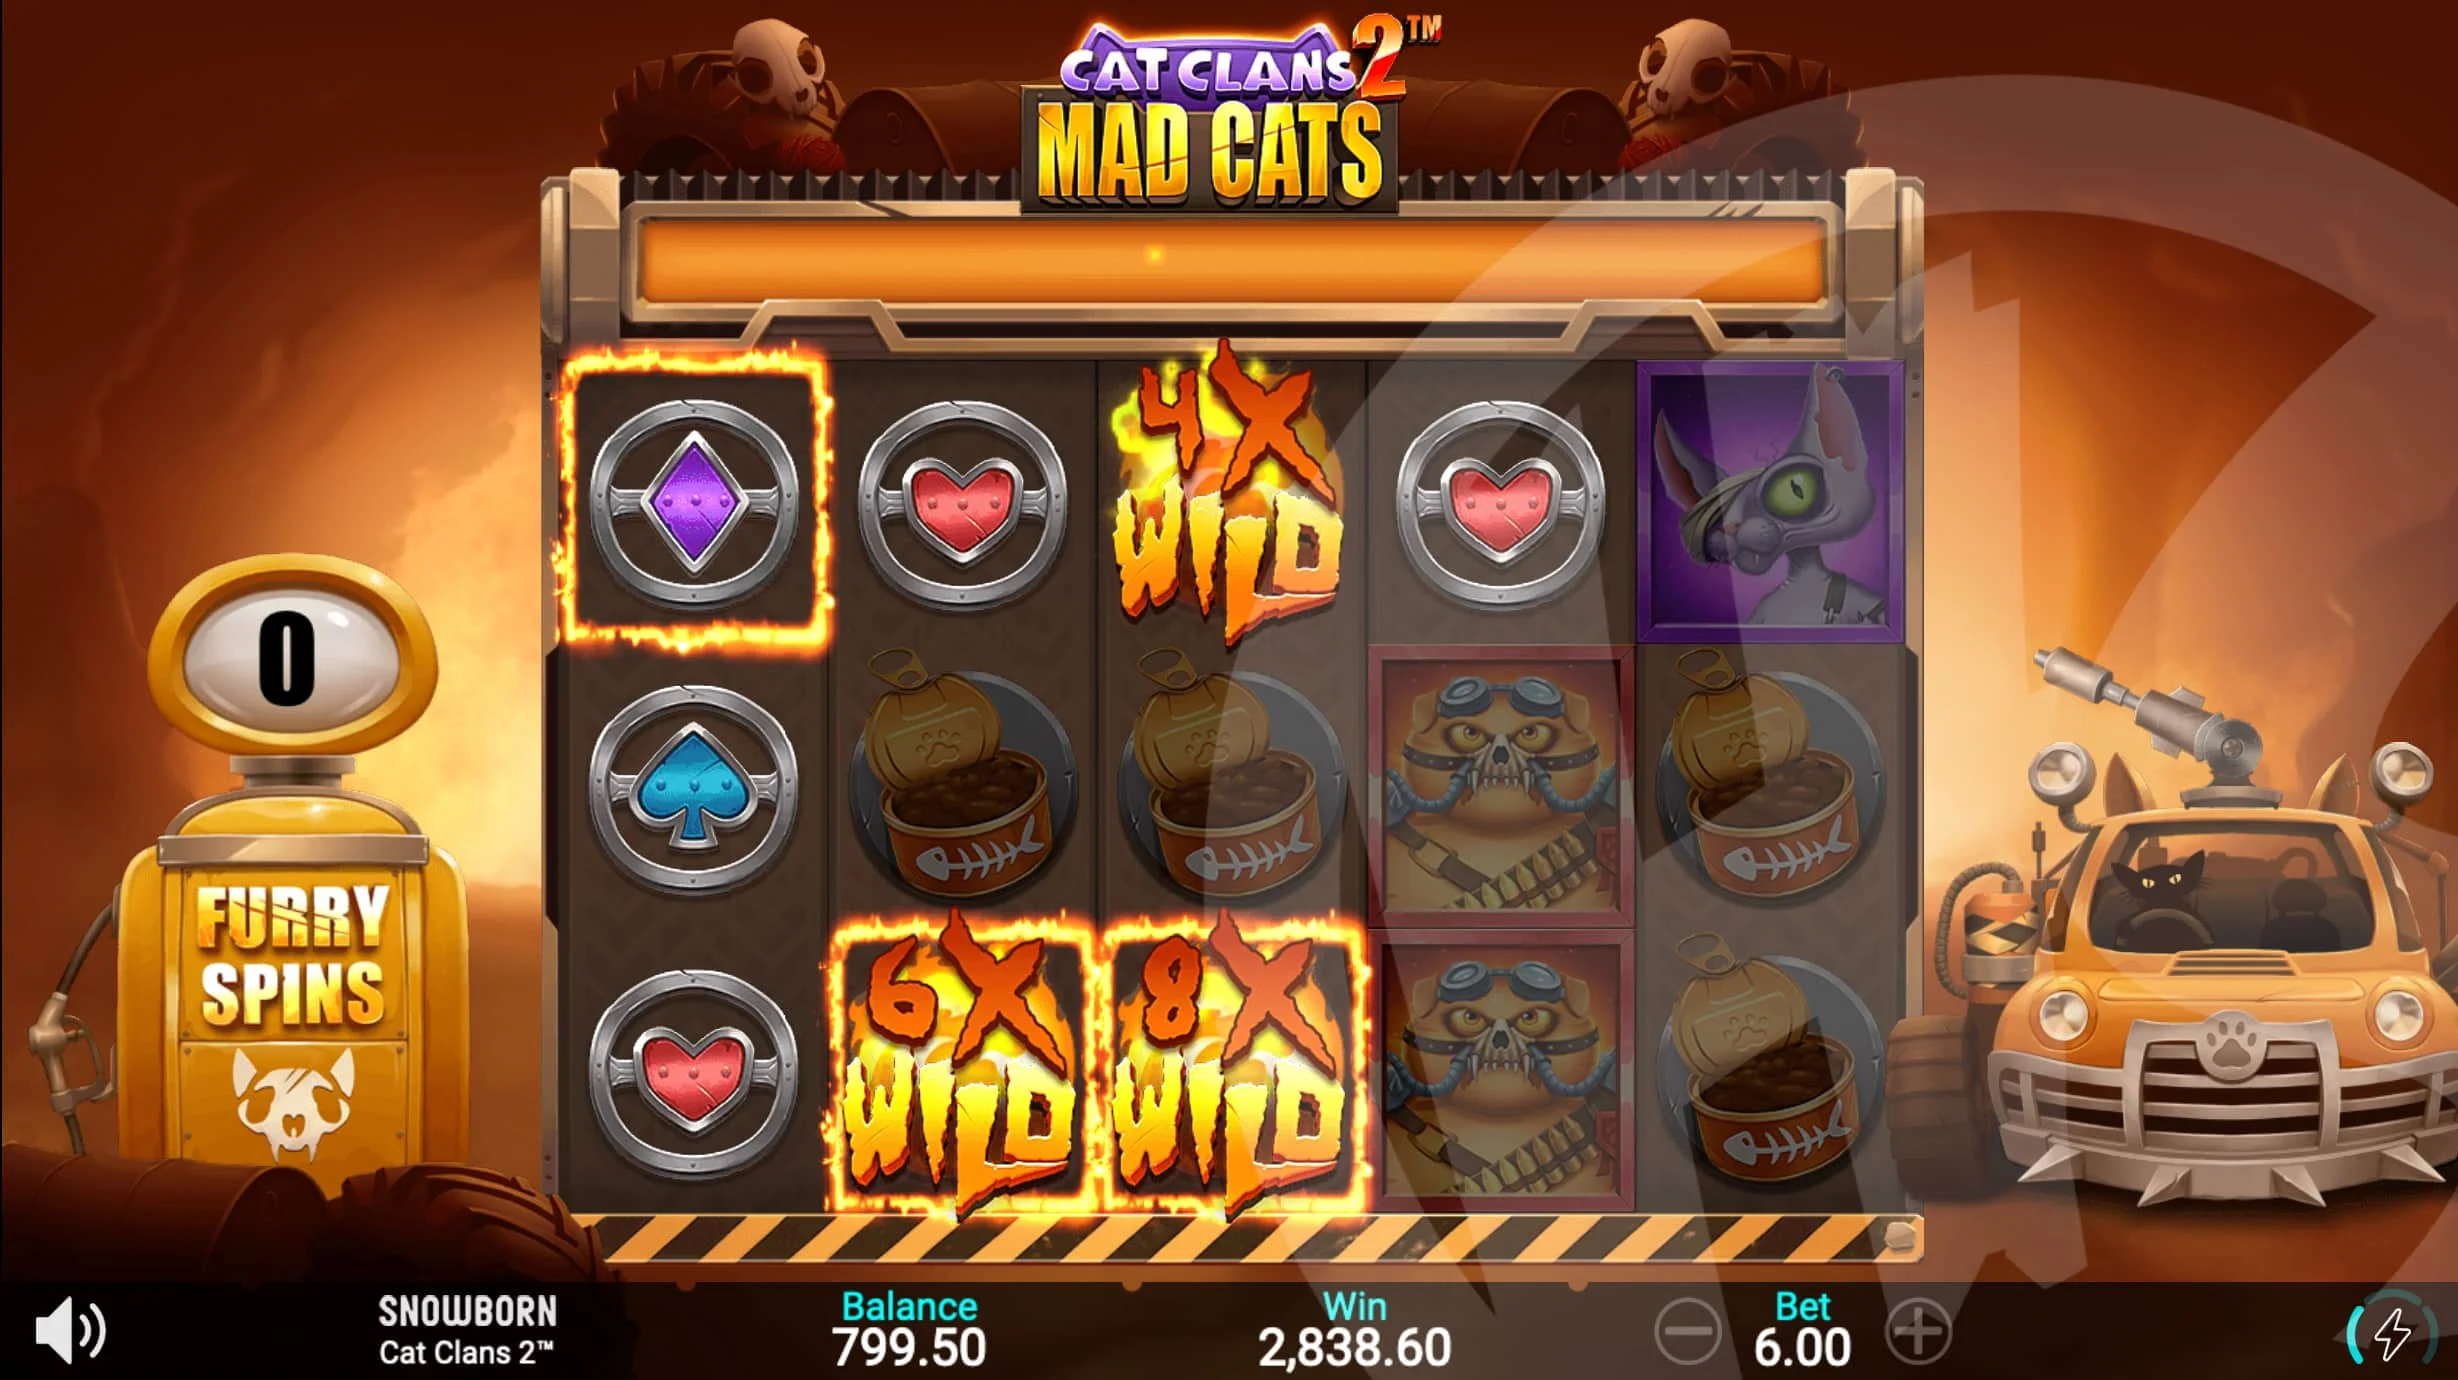 Cat Clans 2 Mad Cats Furry Spins Max